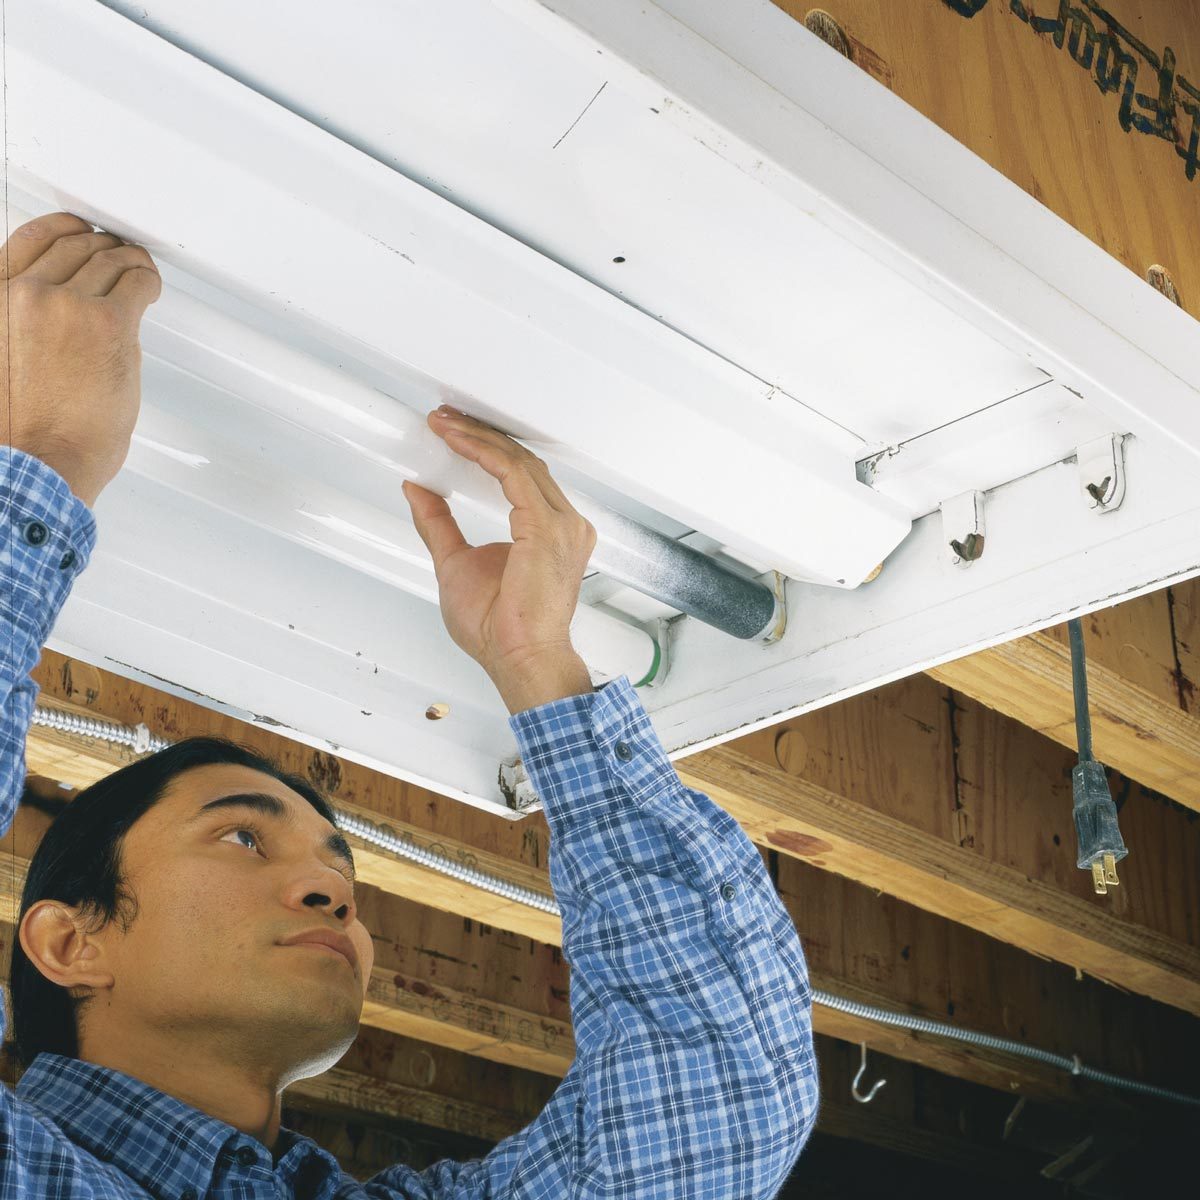 How To Replace A Fluorescent Light Bulb Family Handyman